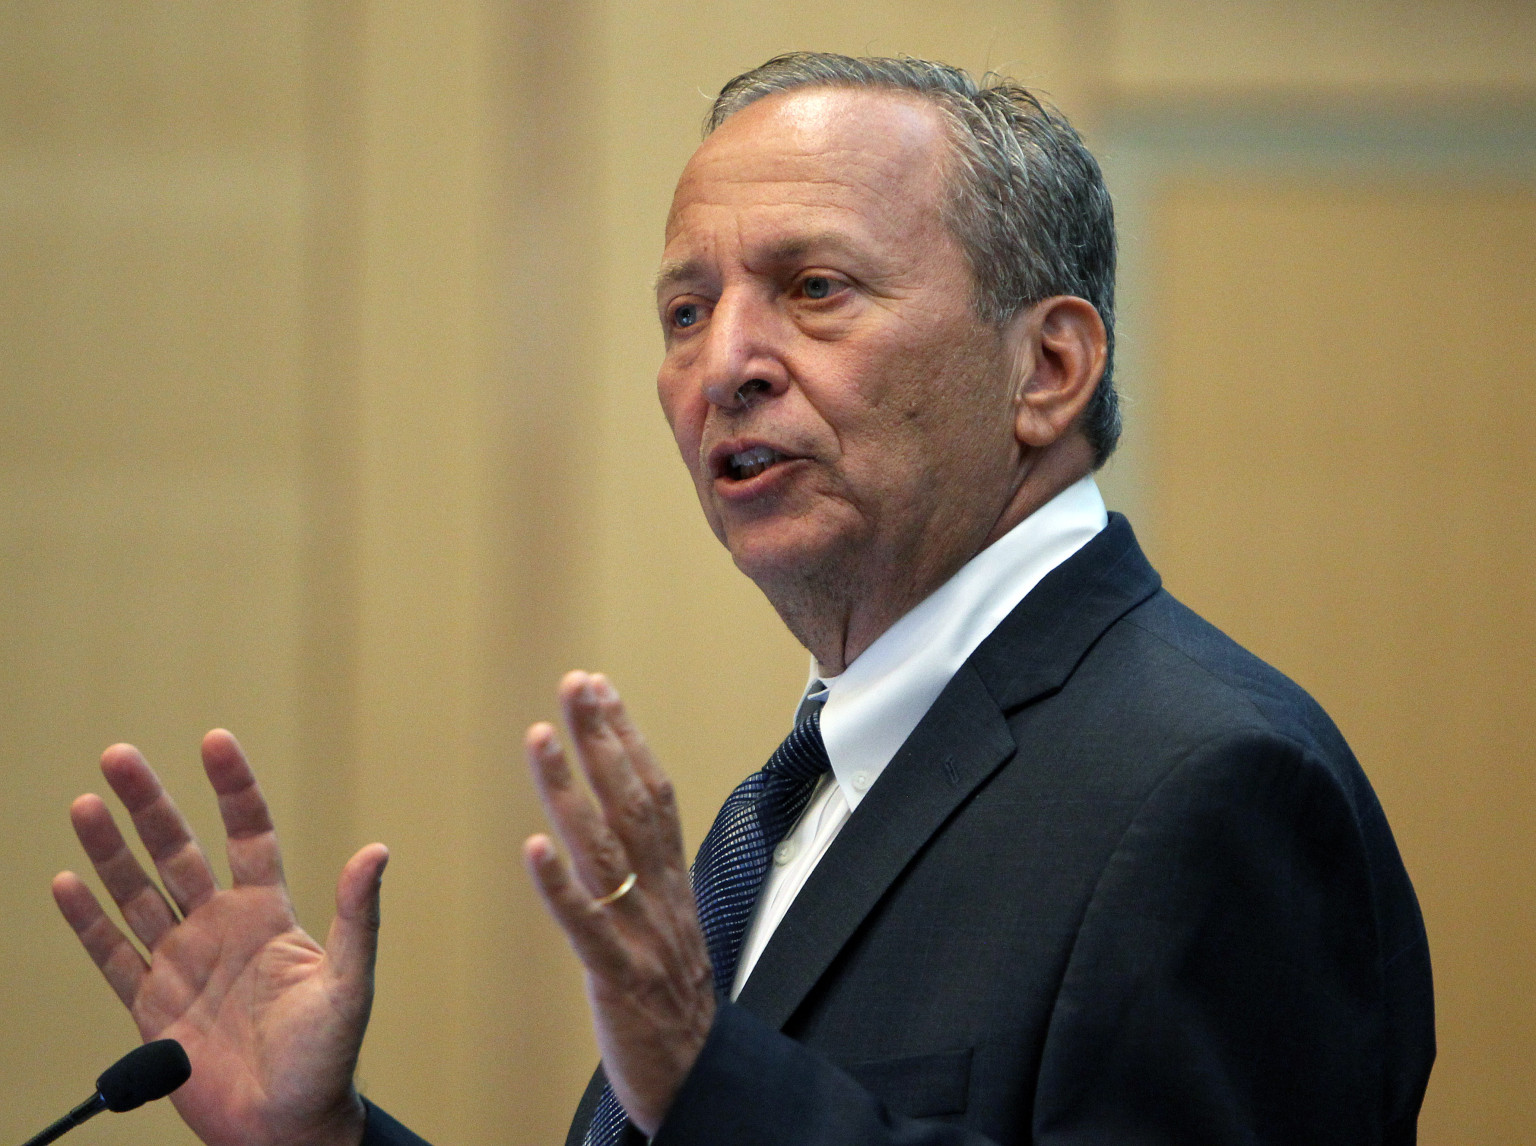 Larry Summers Janet Yellen And The Fractious Debate Over